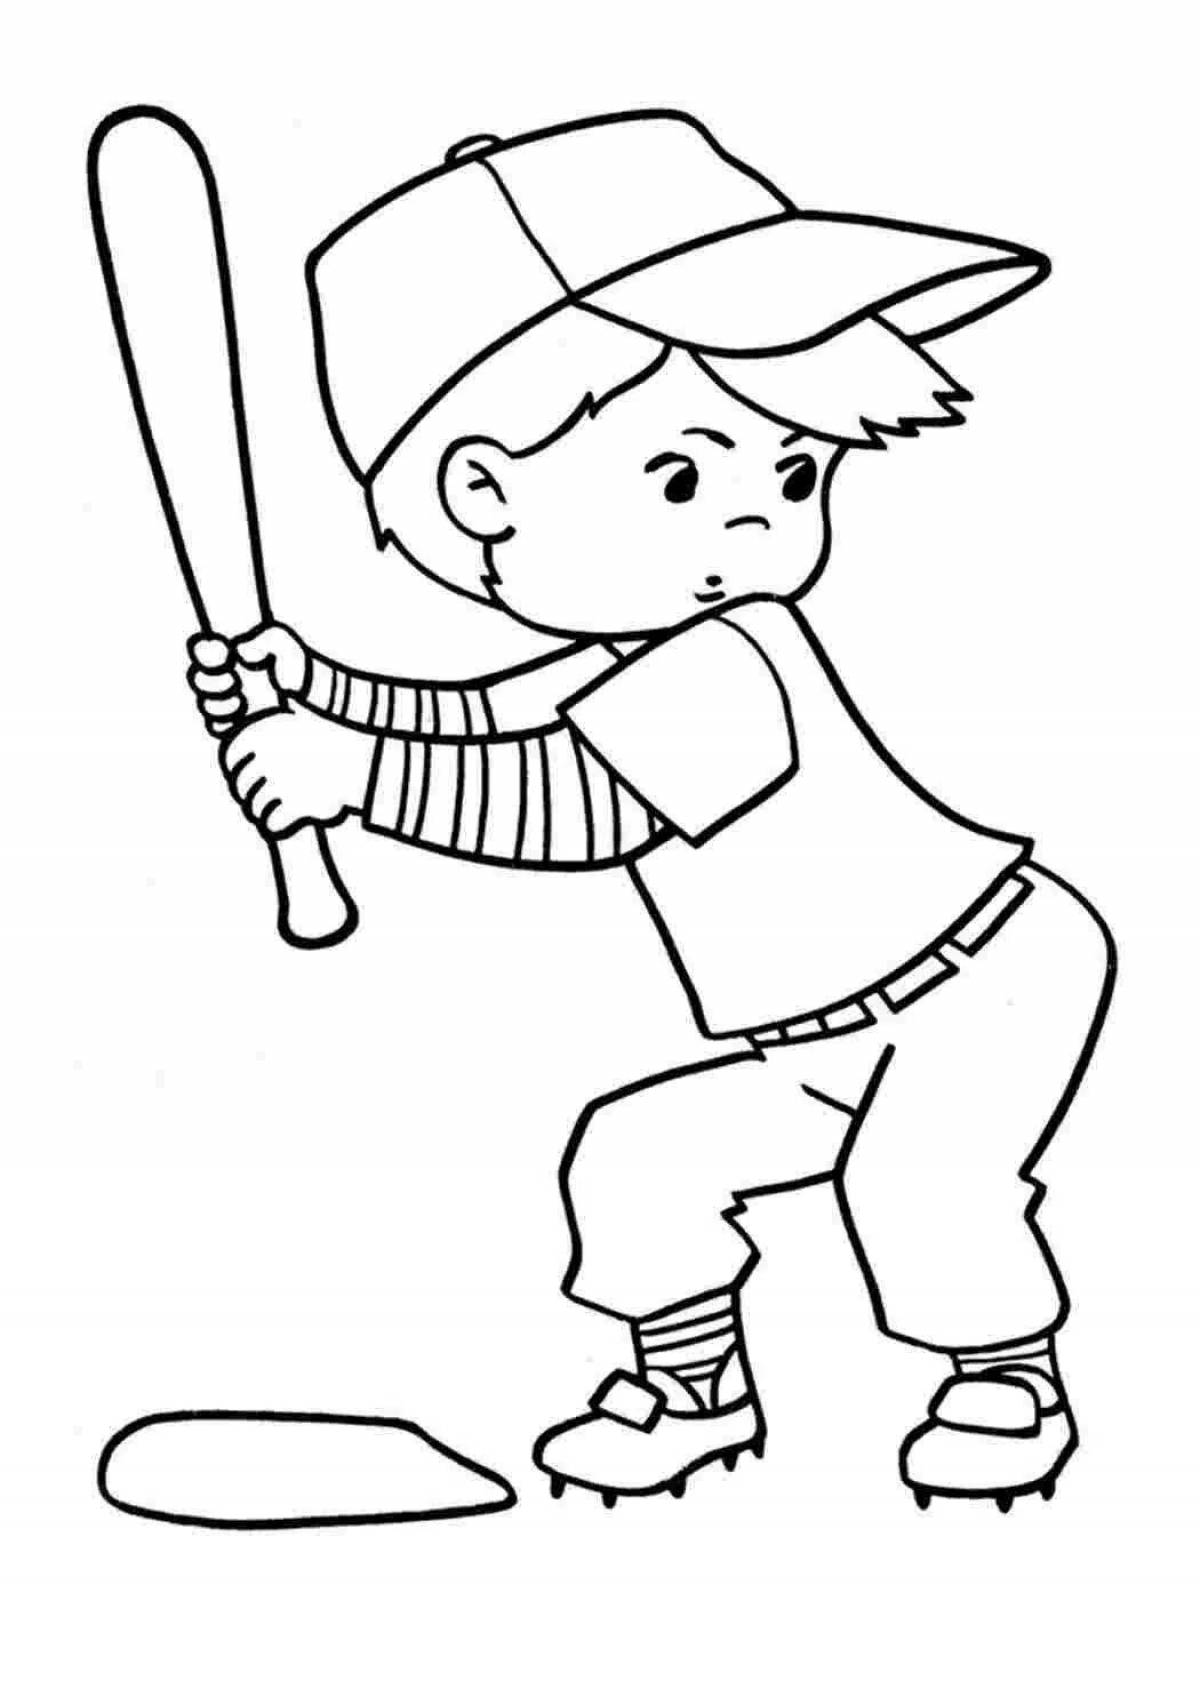 Fun sports coloring pages for preschoolers